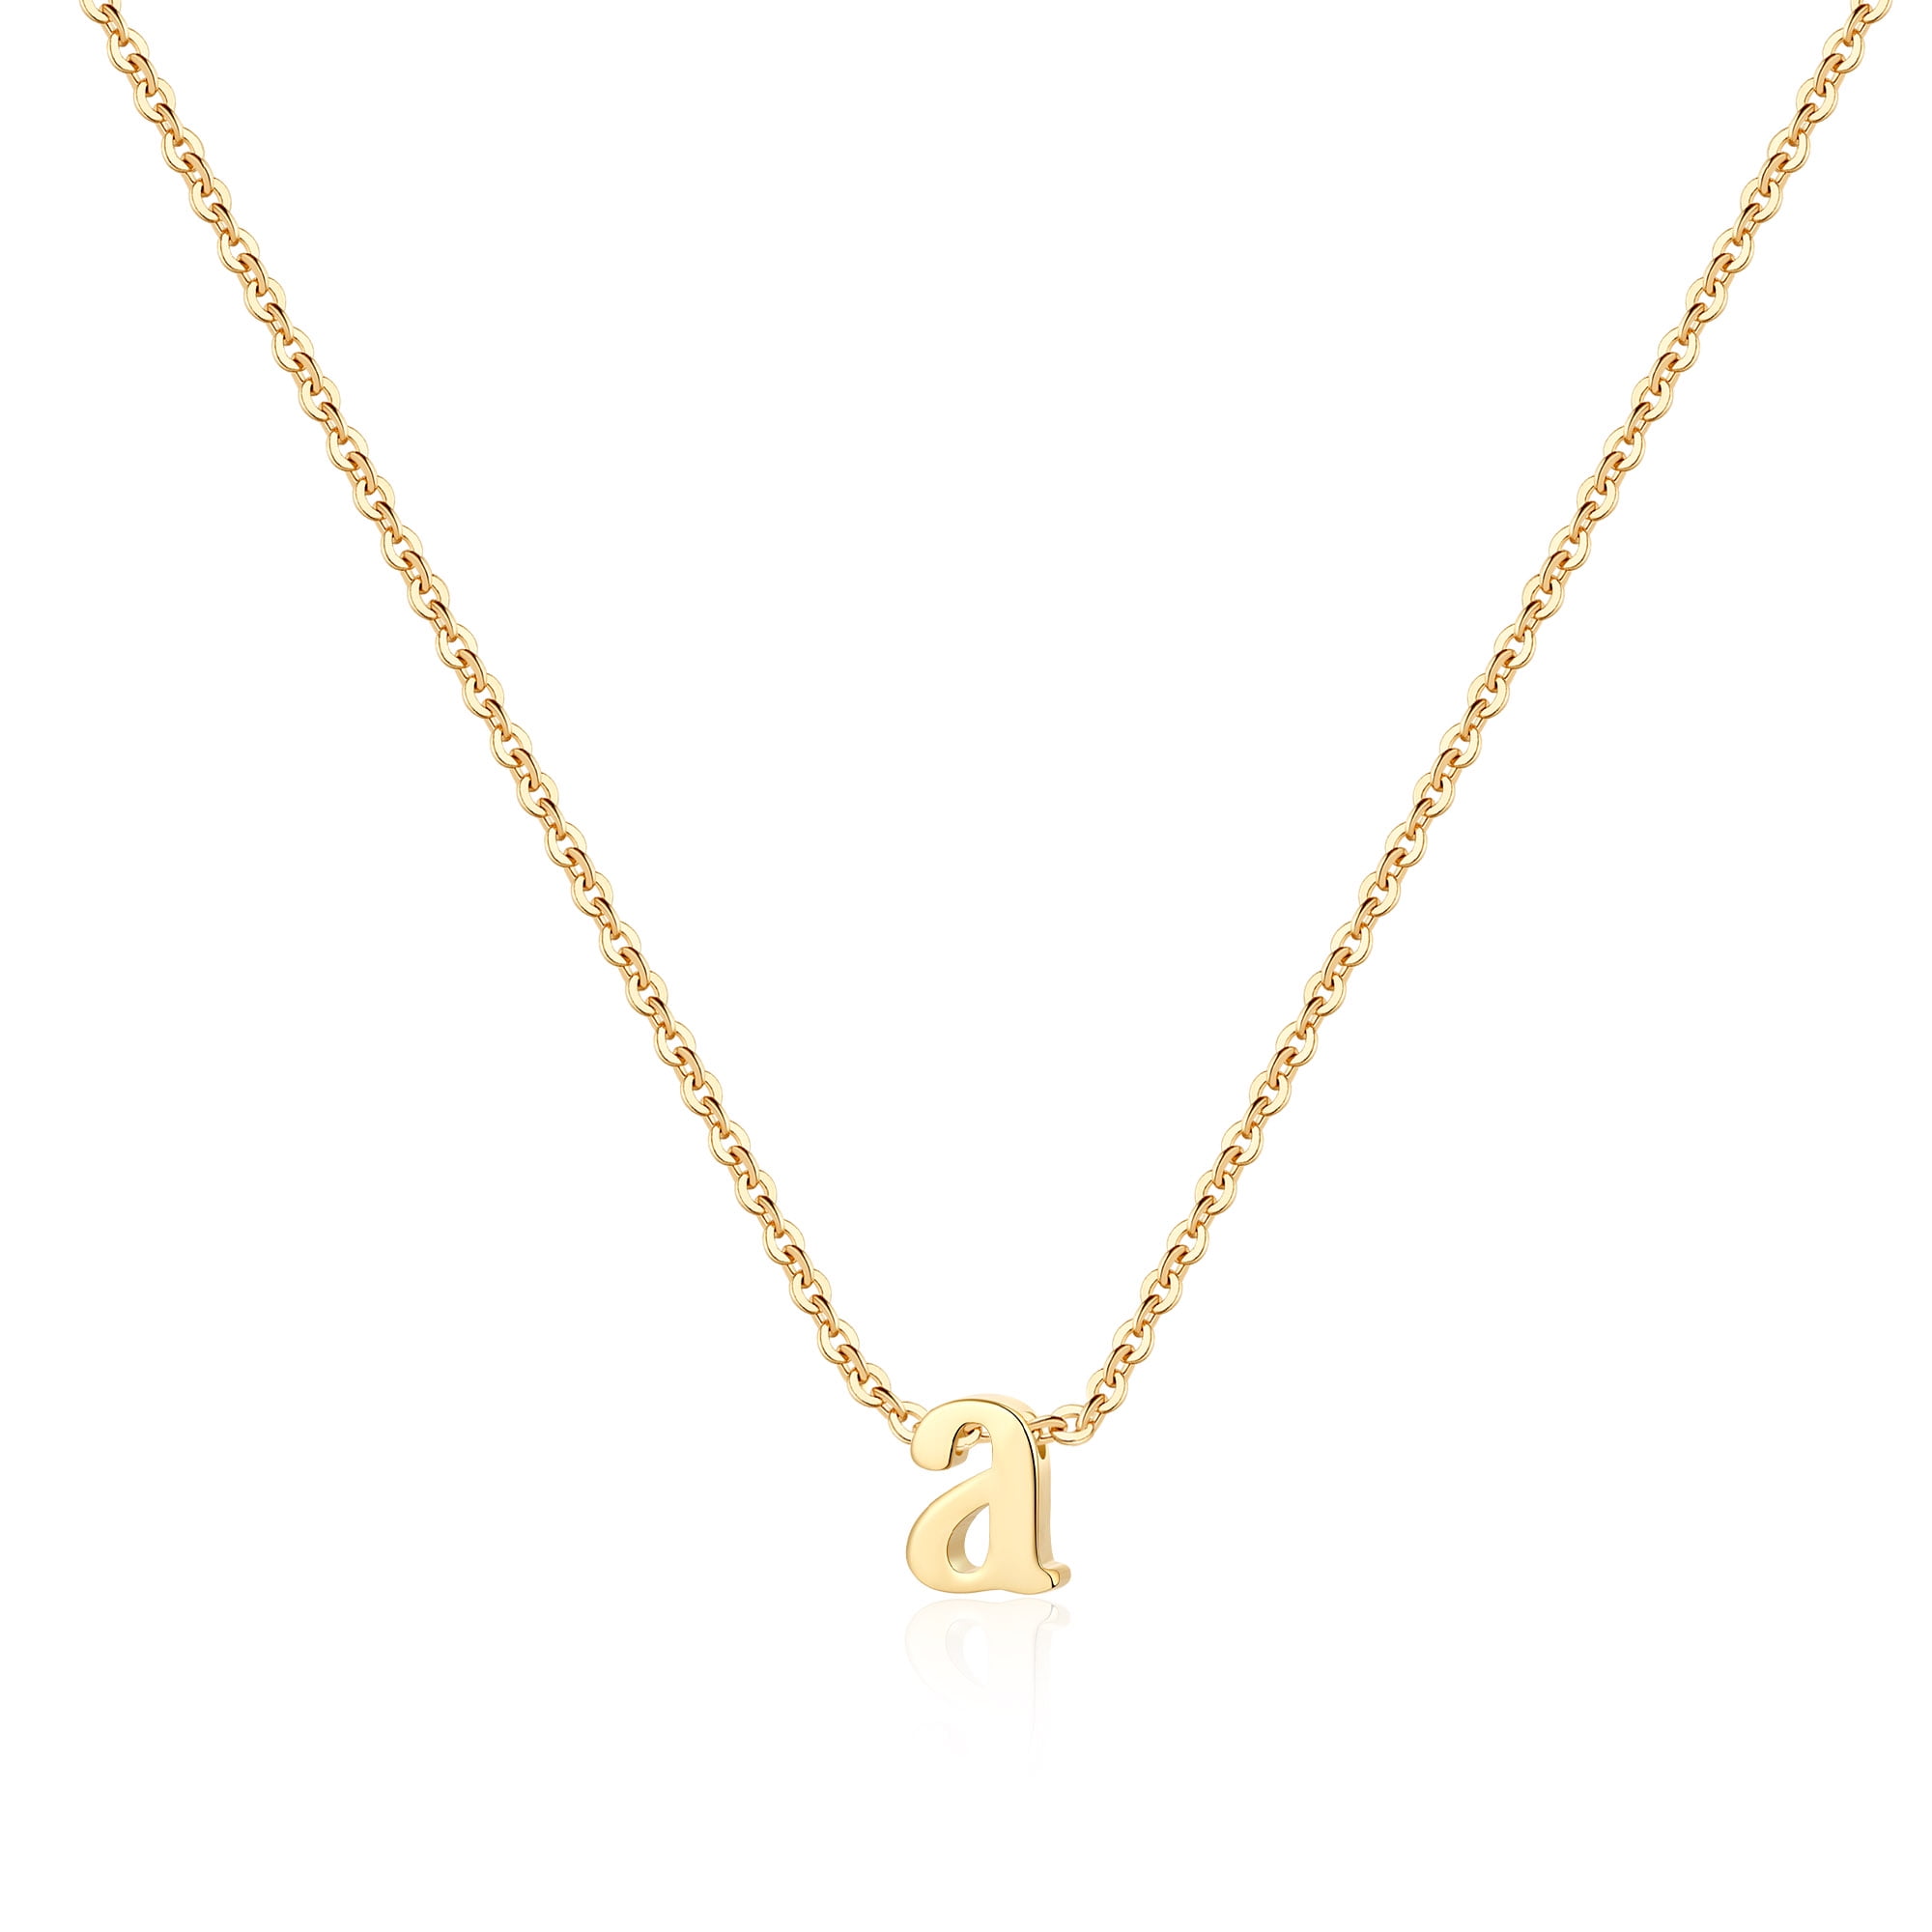 Small Initial Necklace ,14K Solid Yellow Gold Letter Necklace, Letter  Pendant, Letter N Necklace in 14K Gold ,Layering Necklace